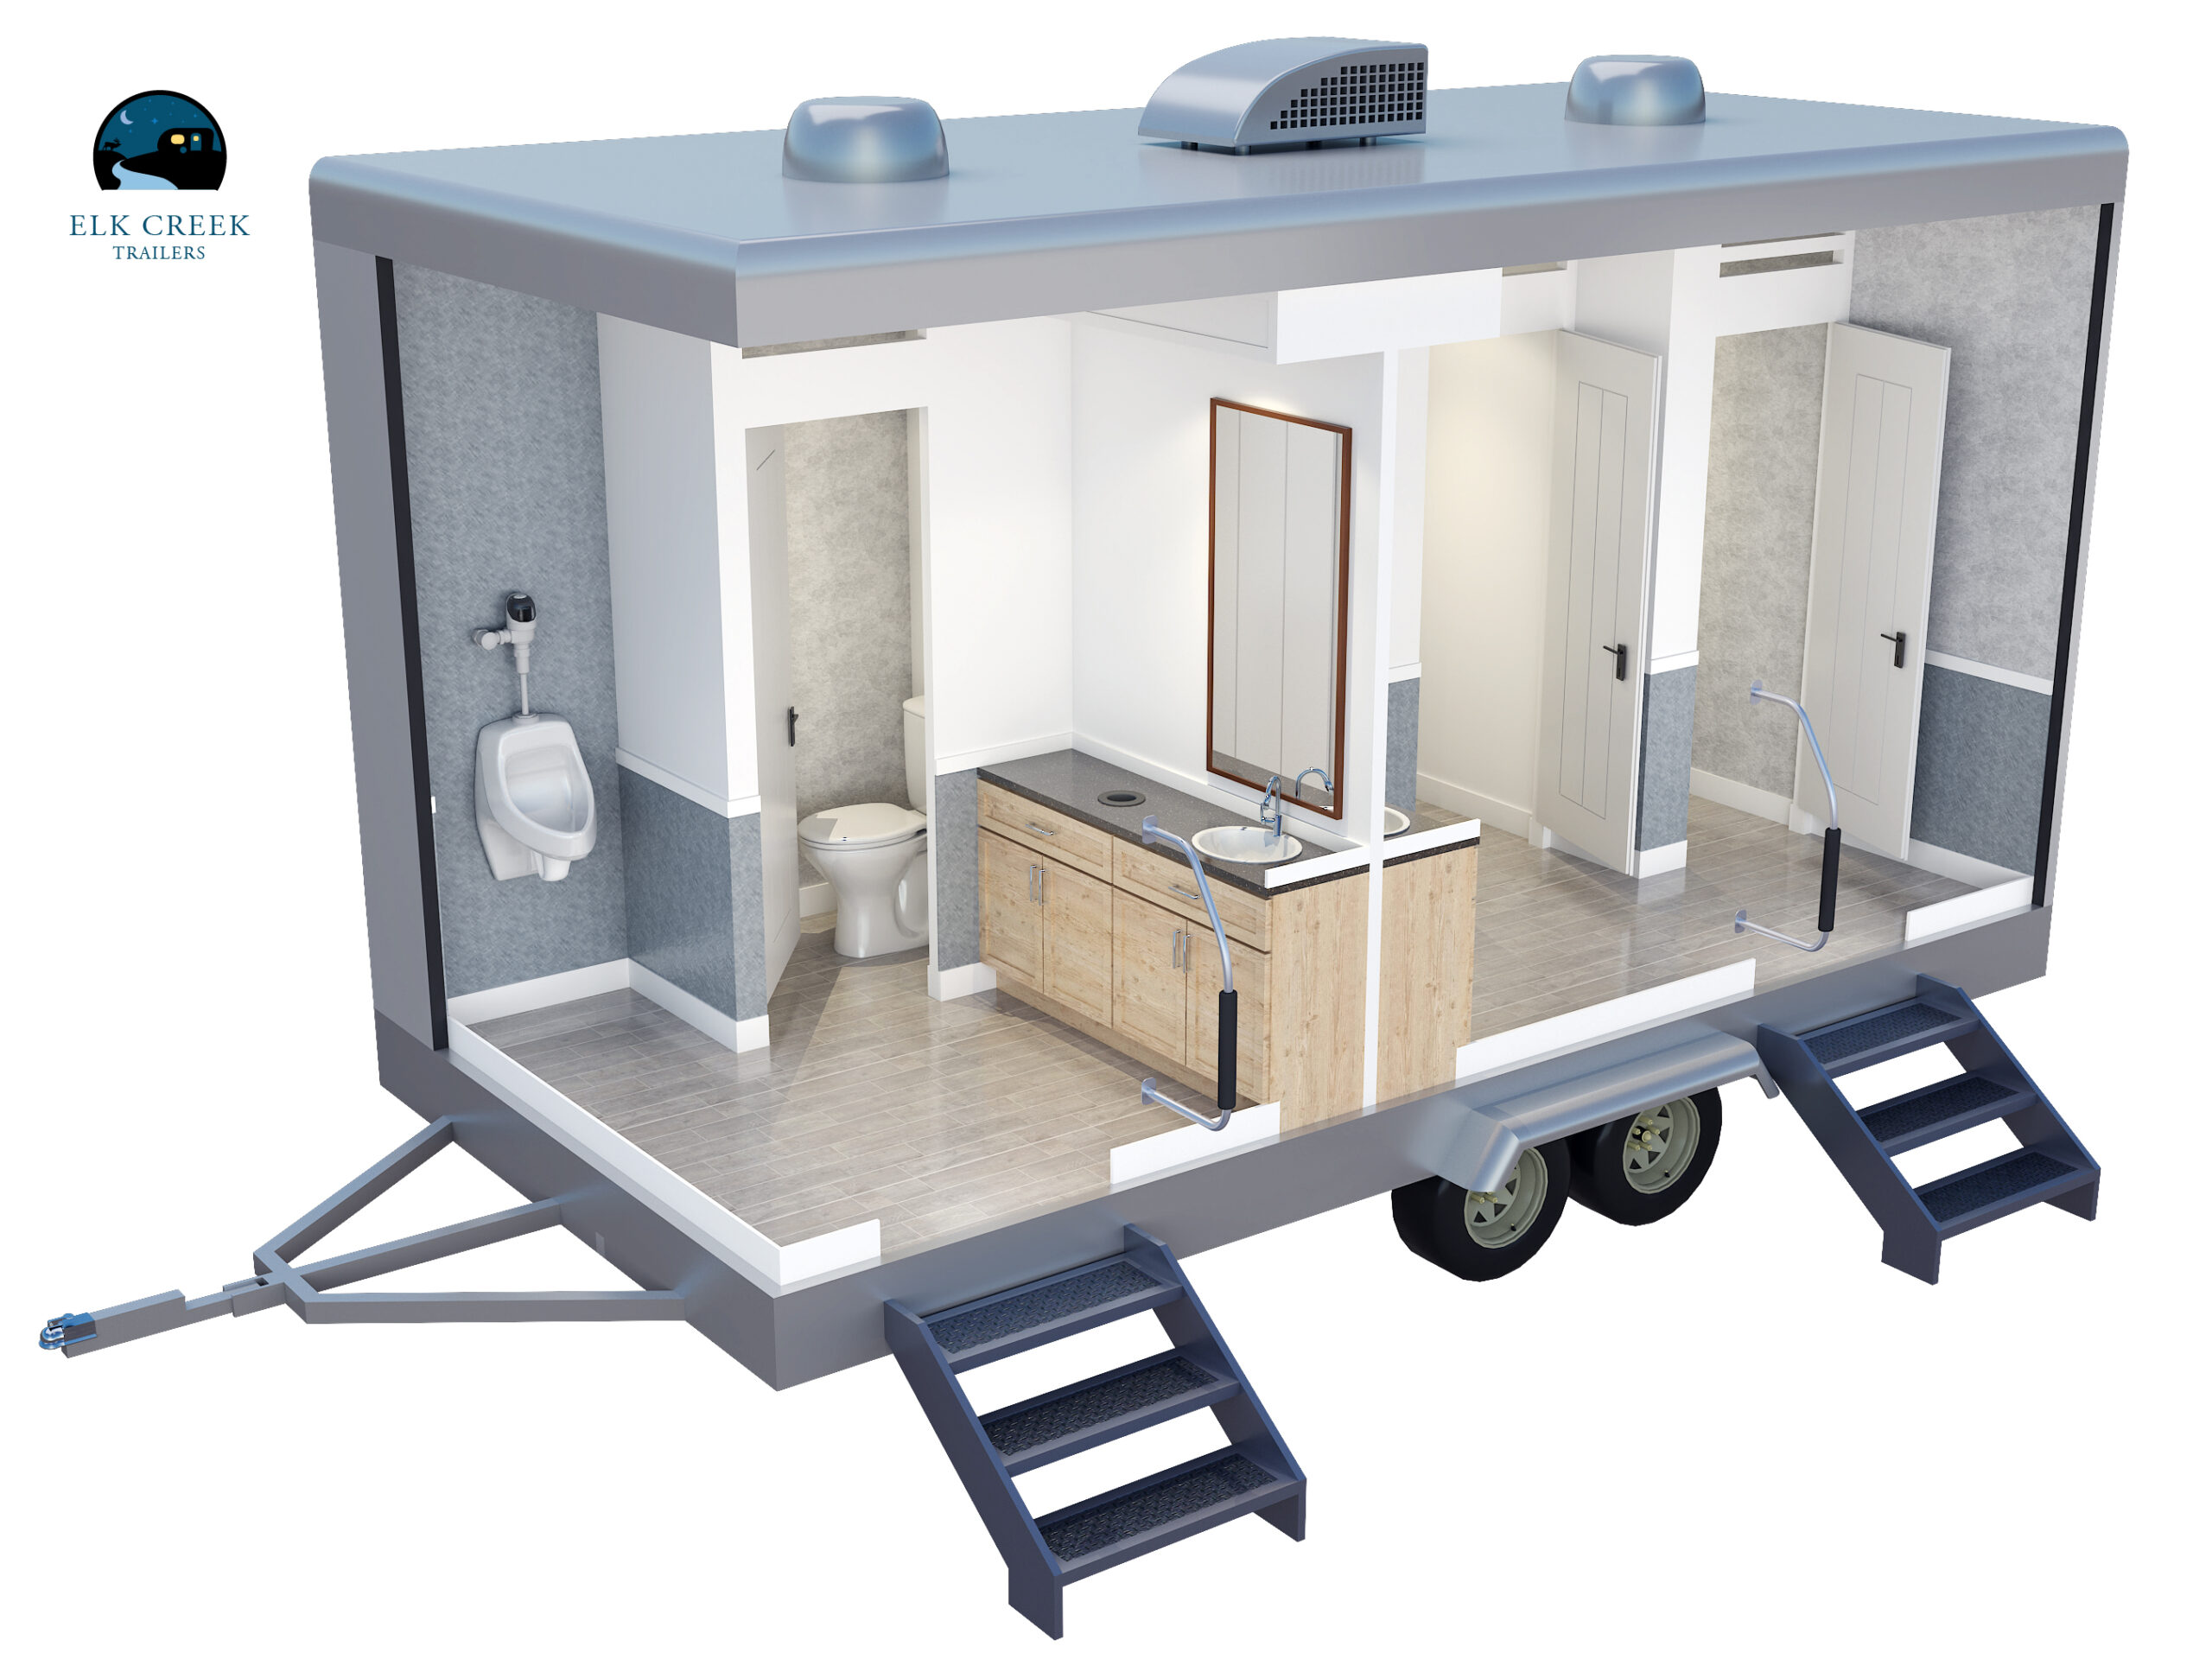 Overhead view of a 4 stall restroom trailer